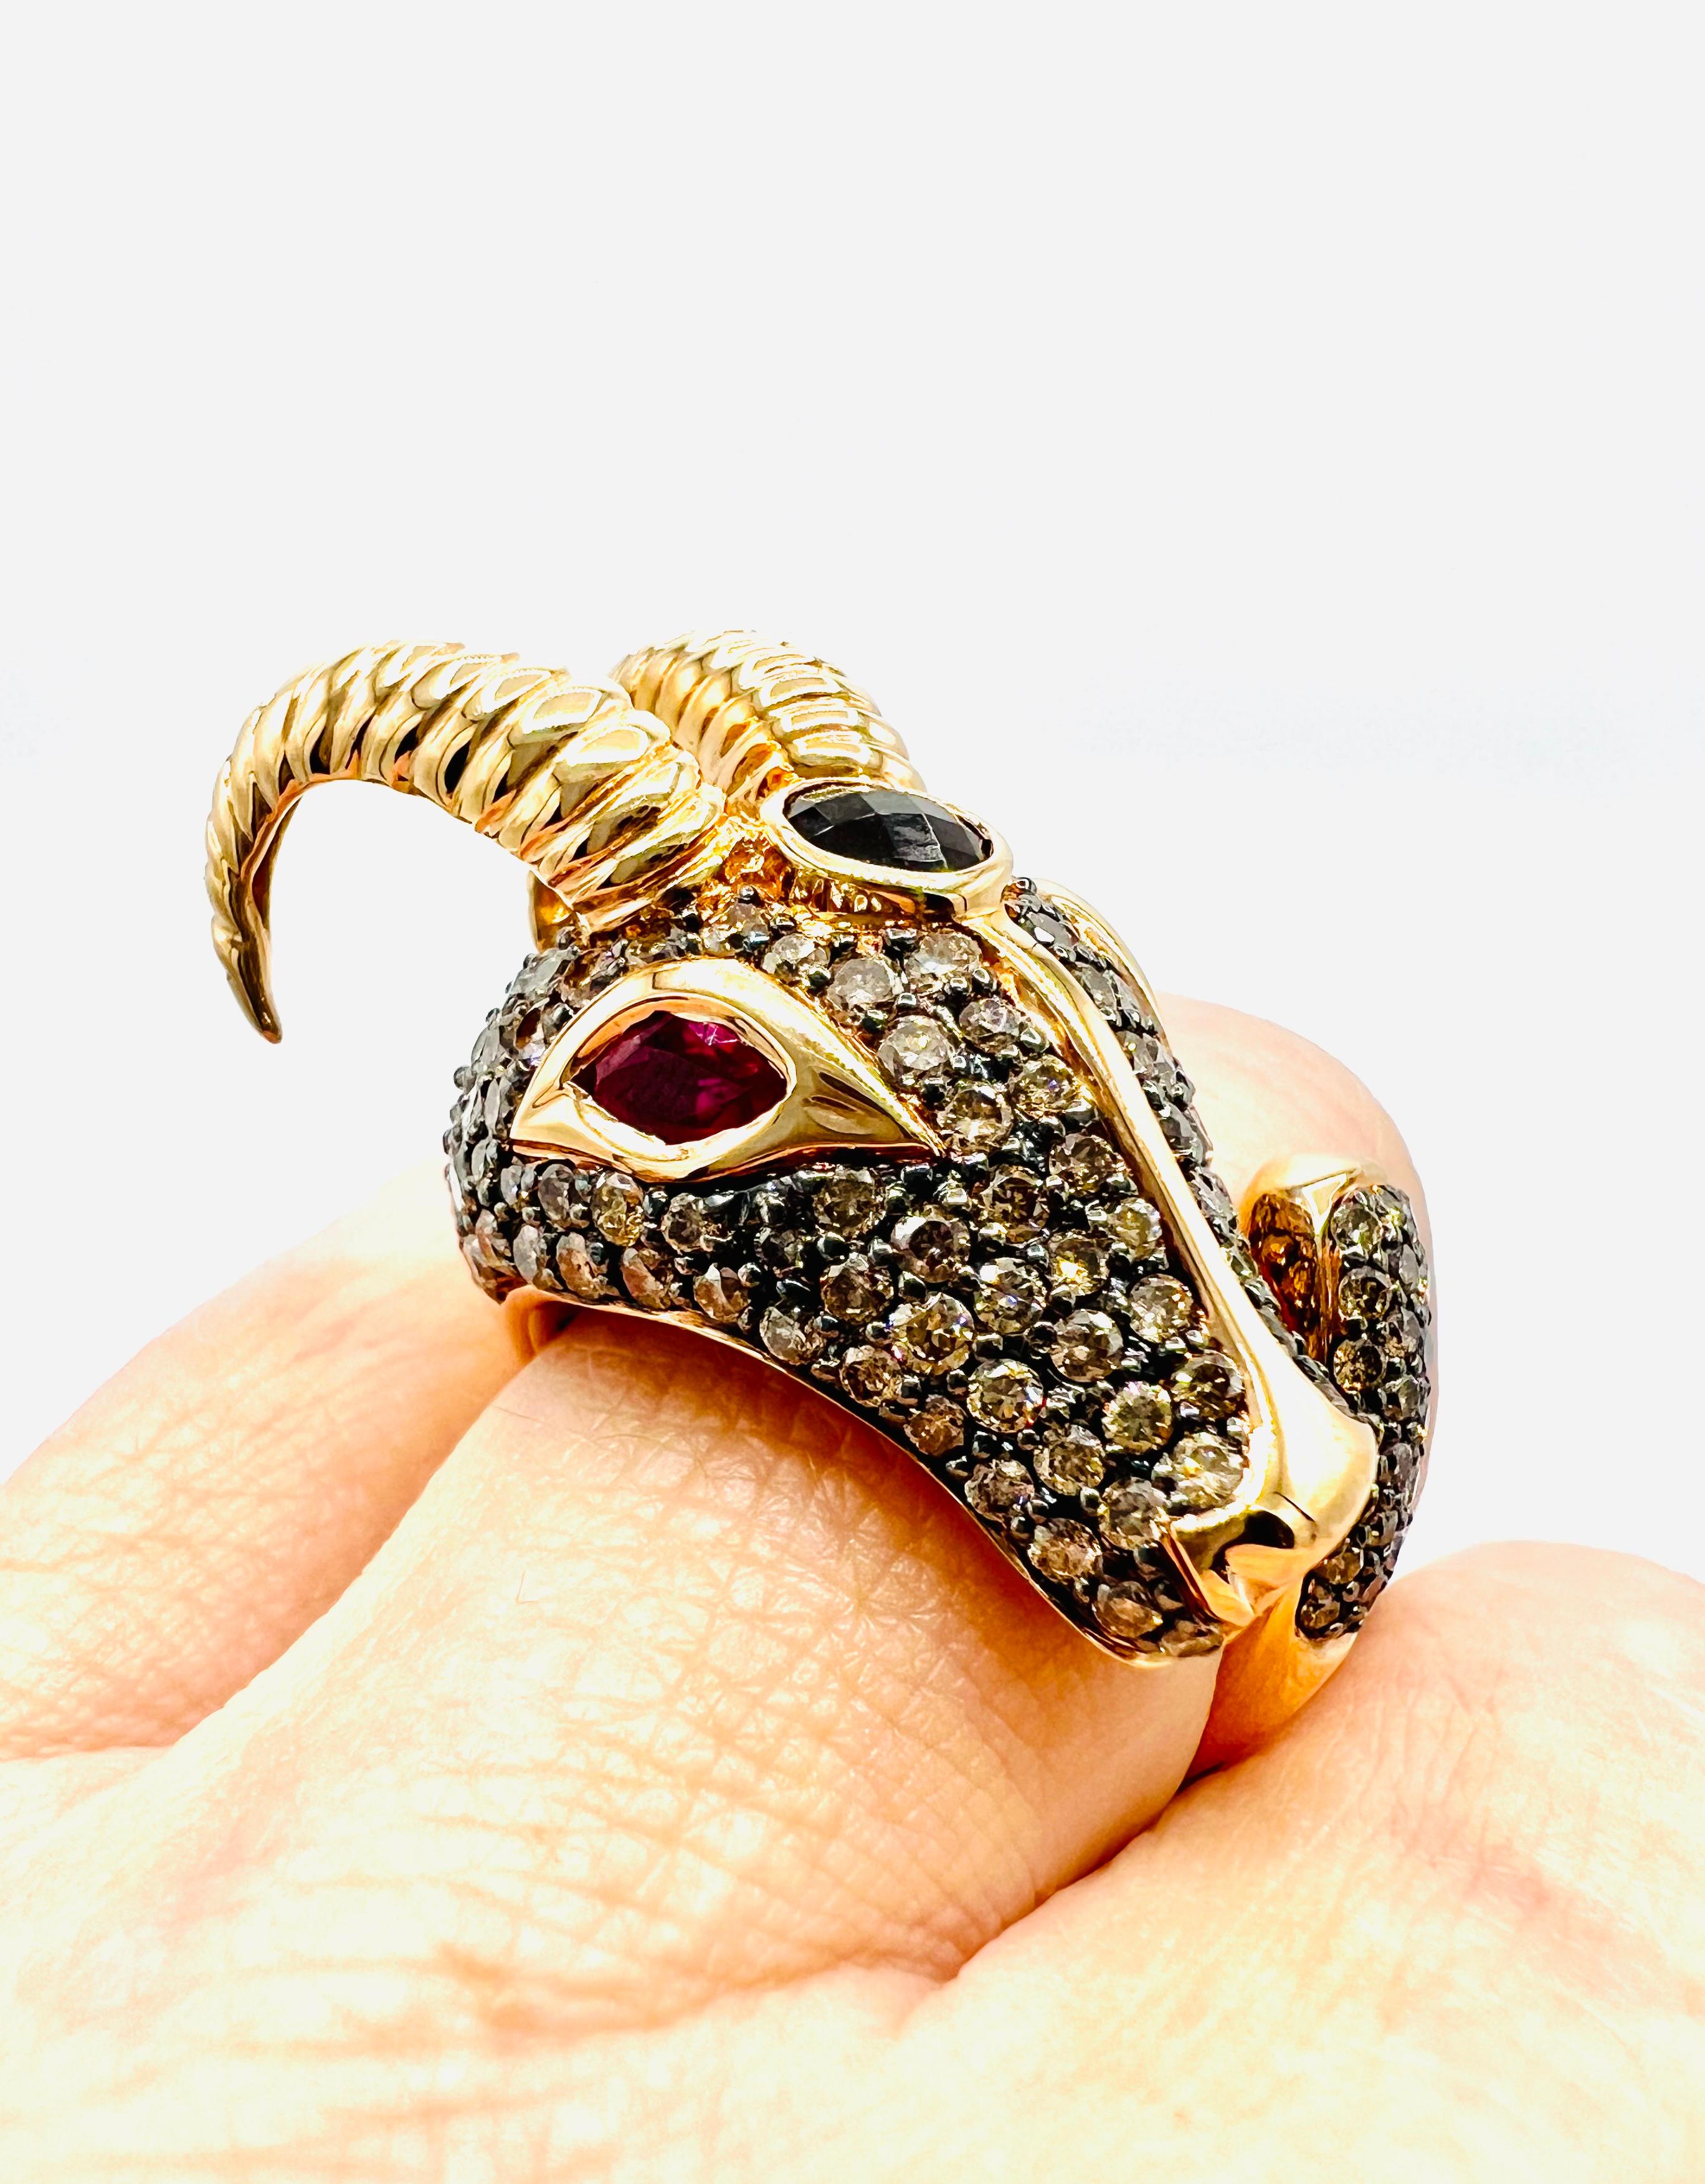 important ring, in the animal theme, representing a superb ram's head, set with a pavé of diamonds, two rubies and smoky quartz
total weight: 18.90 grams
Size: 54 or 6.3/4